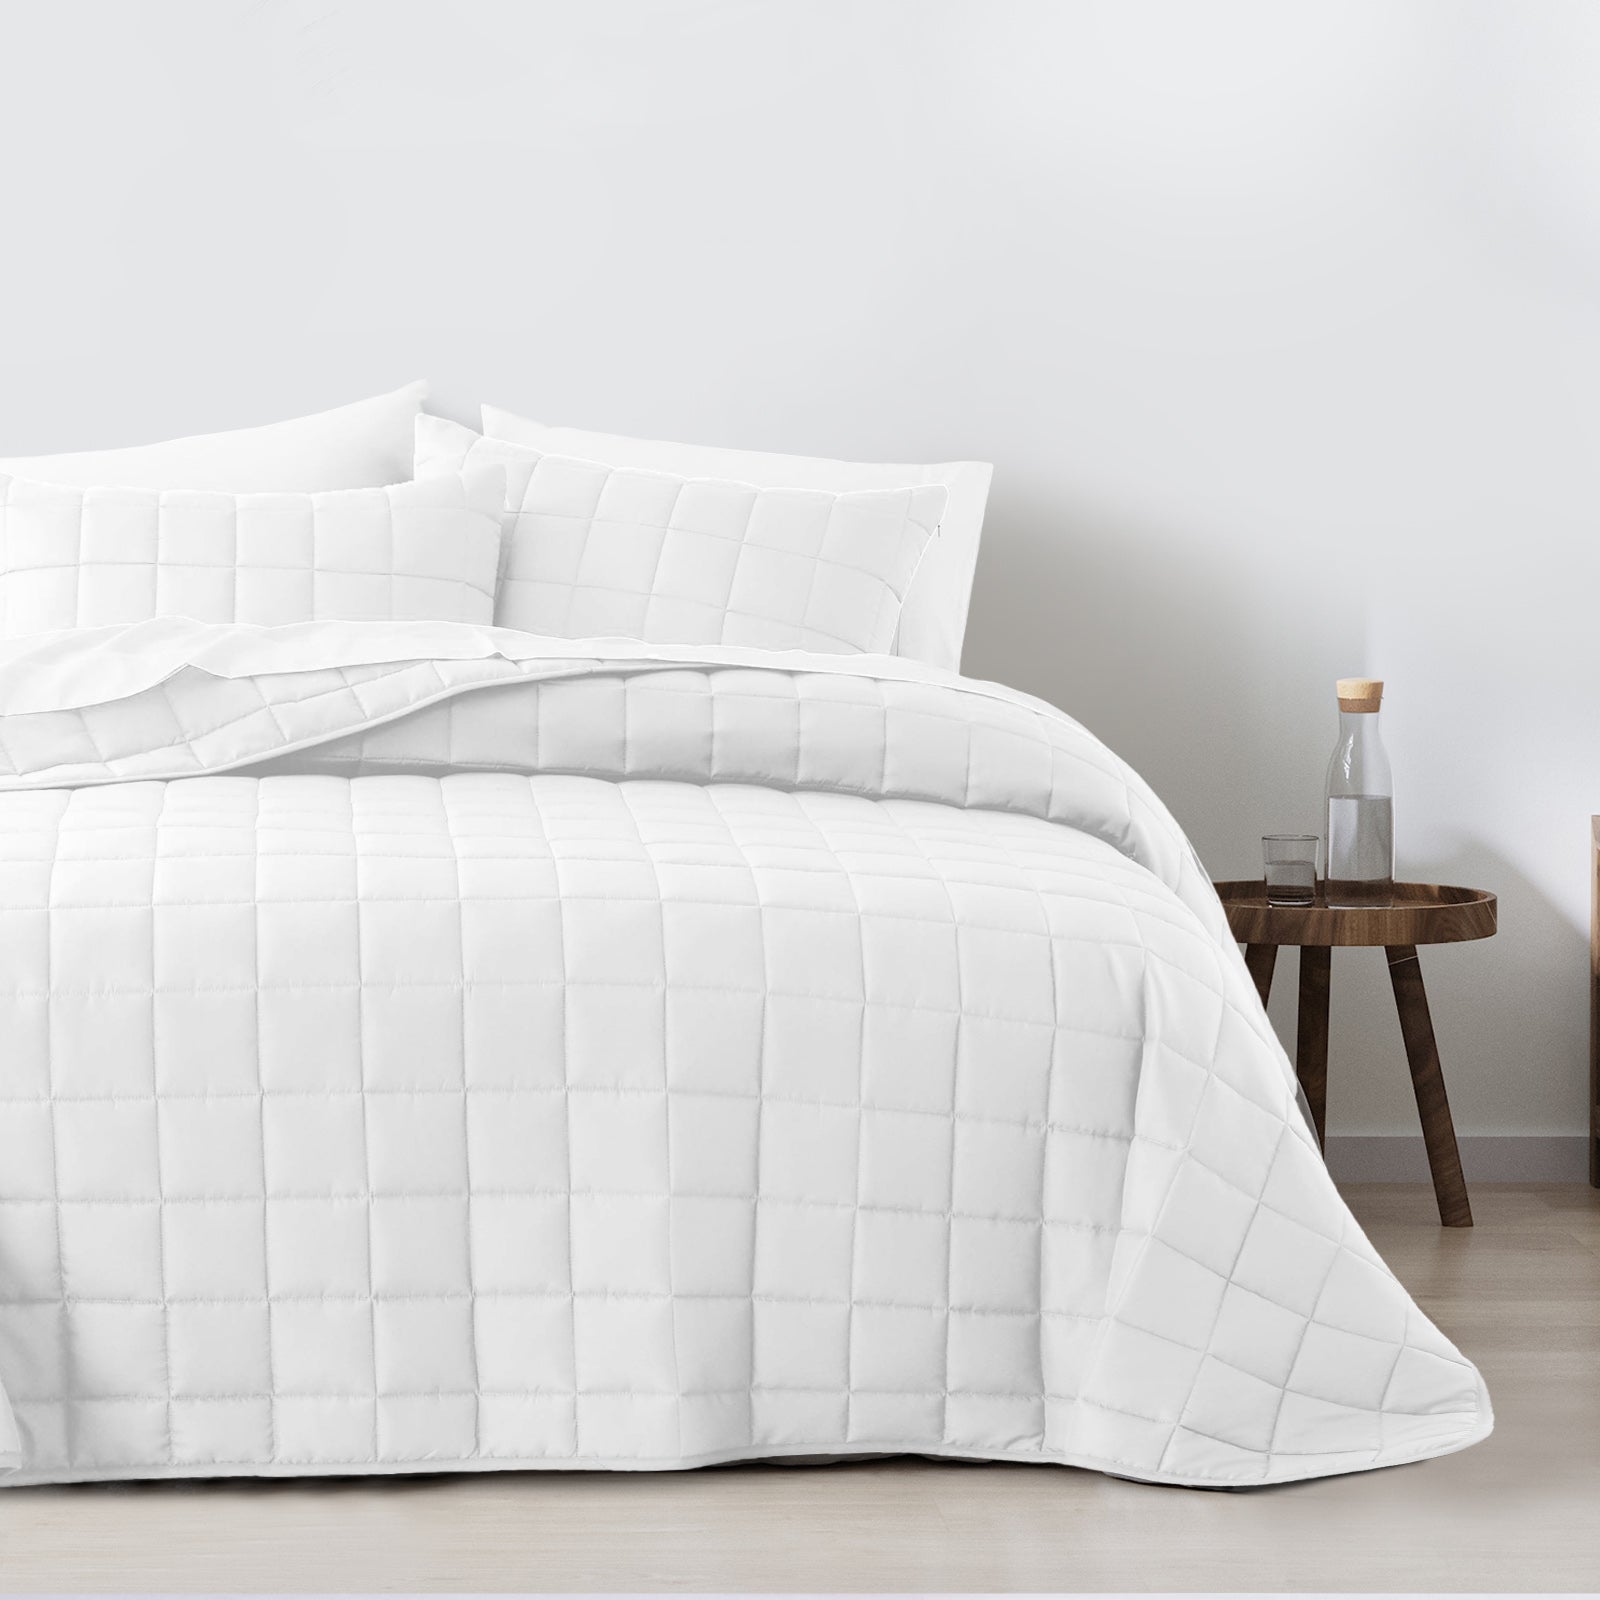 Royal Comfort Coverlet Set Bedspread Soft Touch Easy Care Breathable 3 Piece Set - Queen - White from Deals499 at Deals499